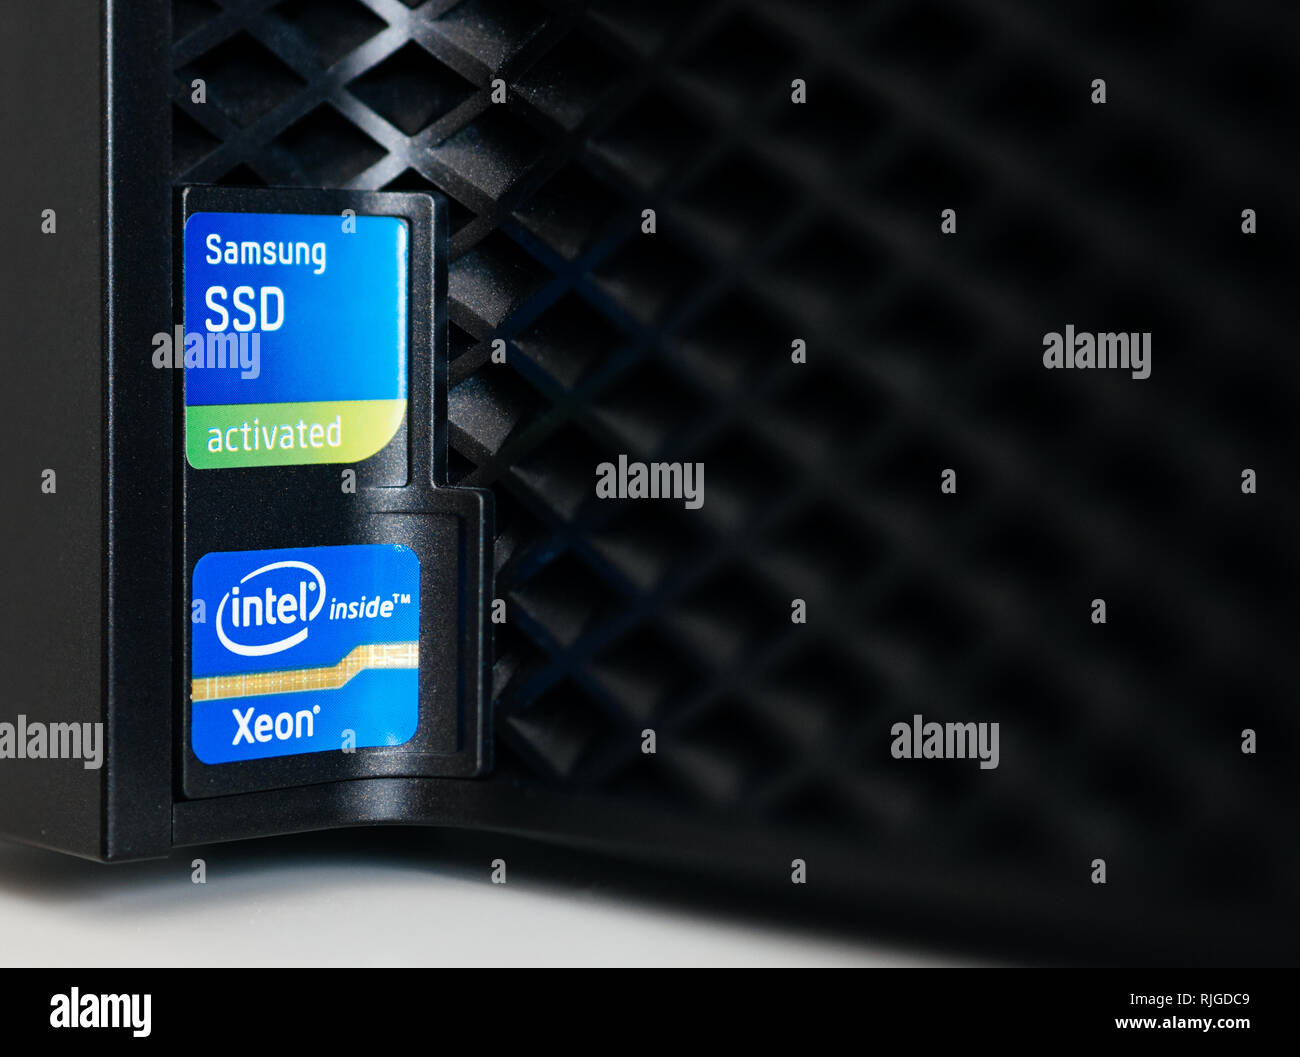 LONDON, UNITED KINGDOM - JUN 30, 2014: Intel inside and SSD Samsung  activated stickers on the front of powerful Dell Precision workstation  Stock Photo - Alamy